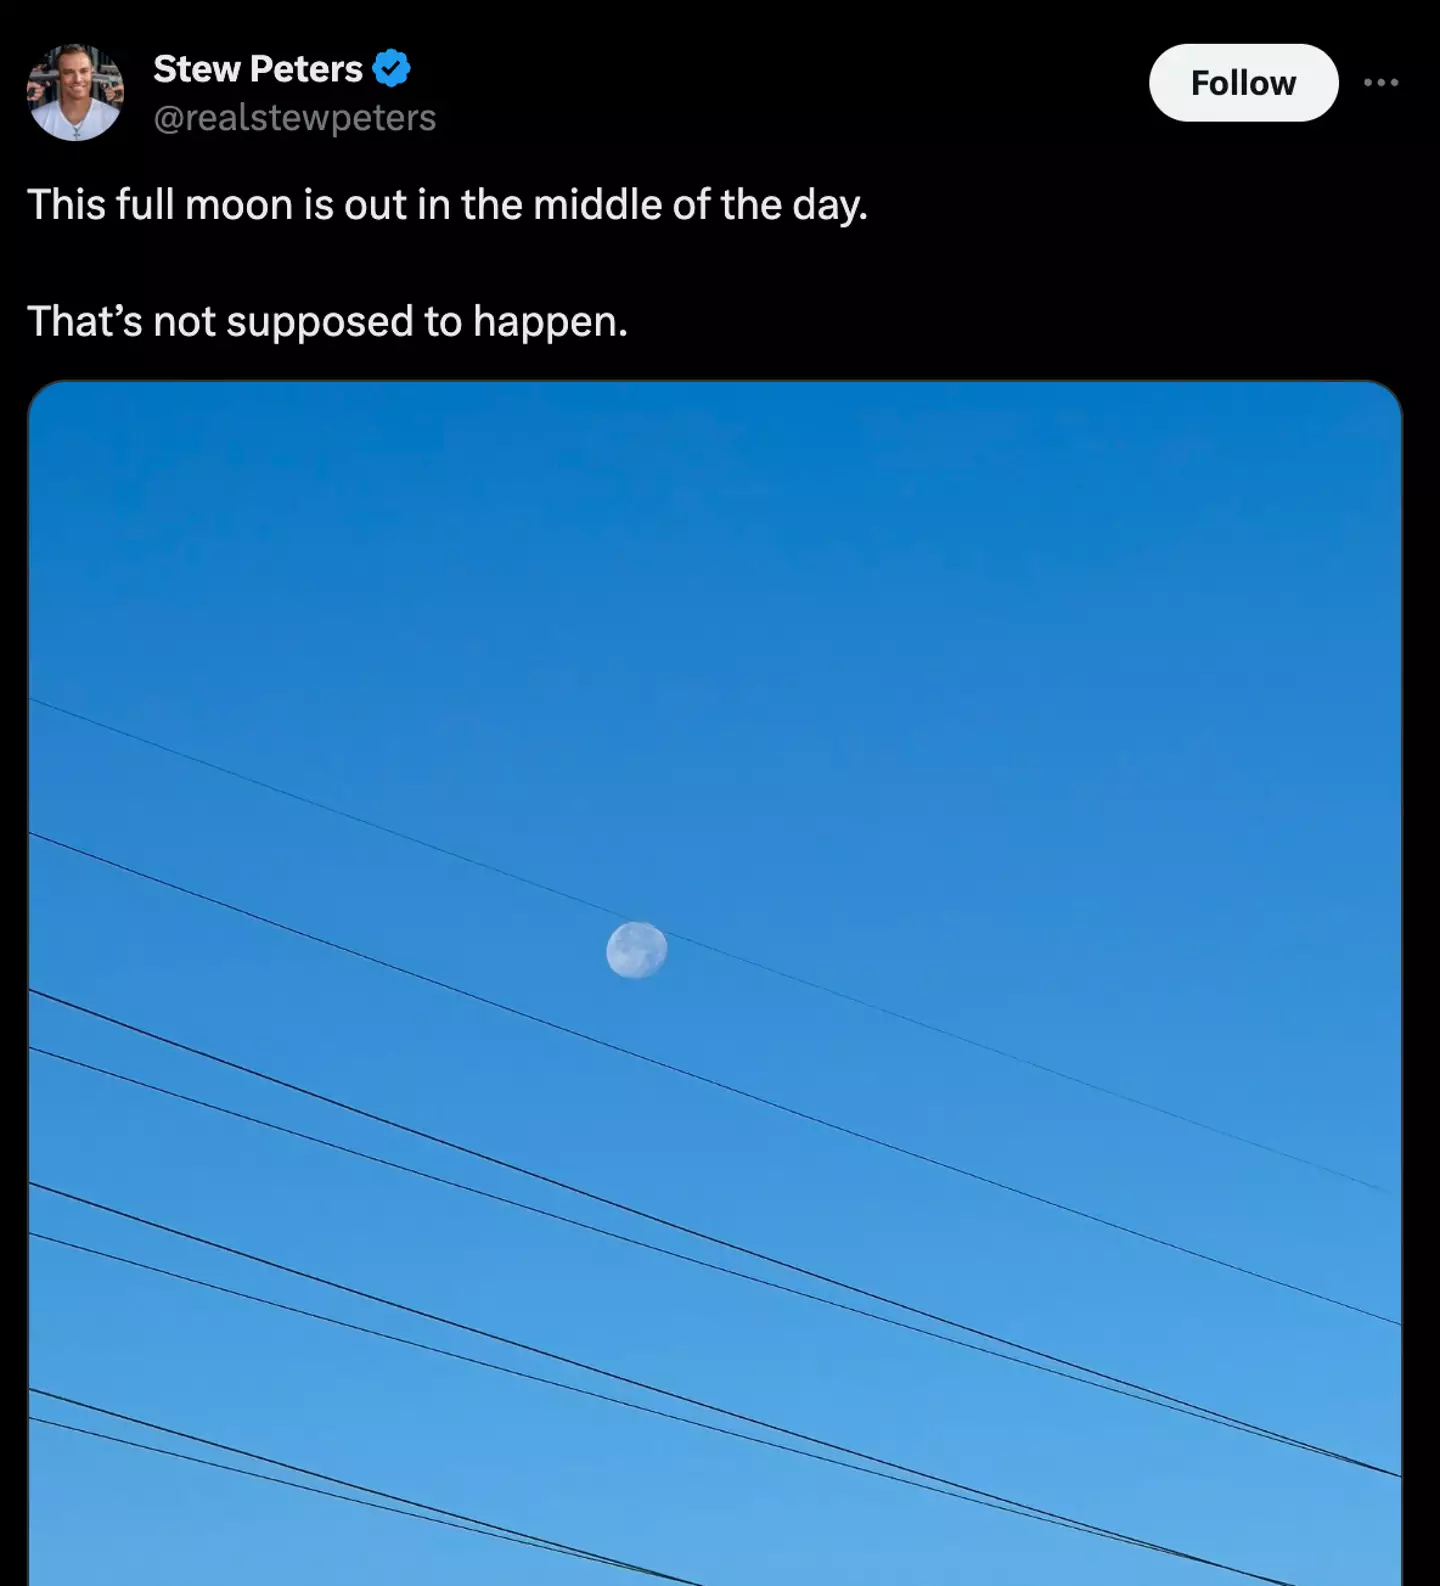 Have you ever seen the moon in daytime before?